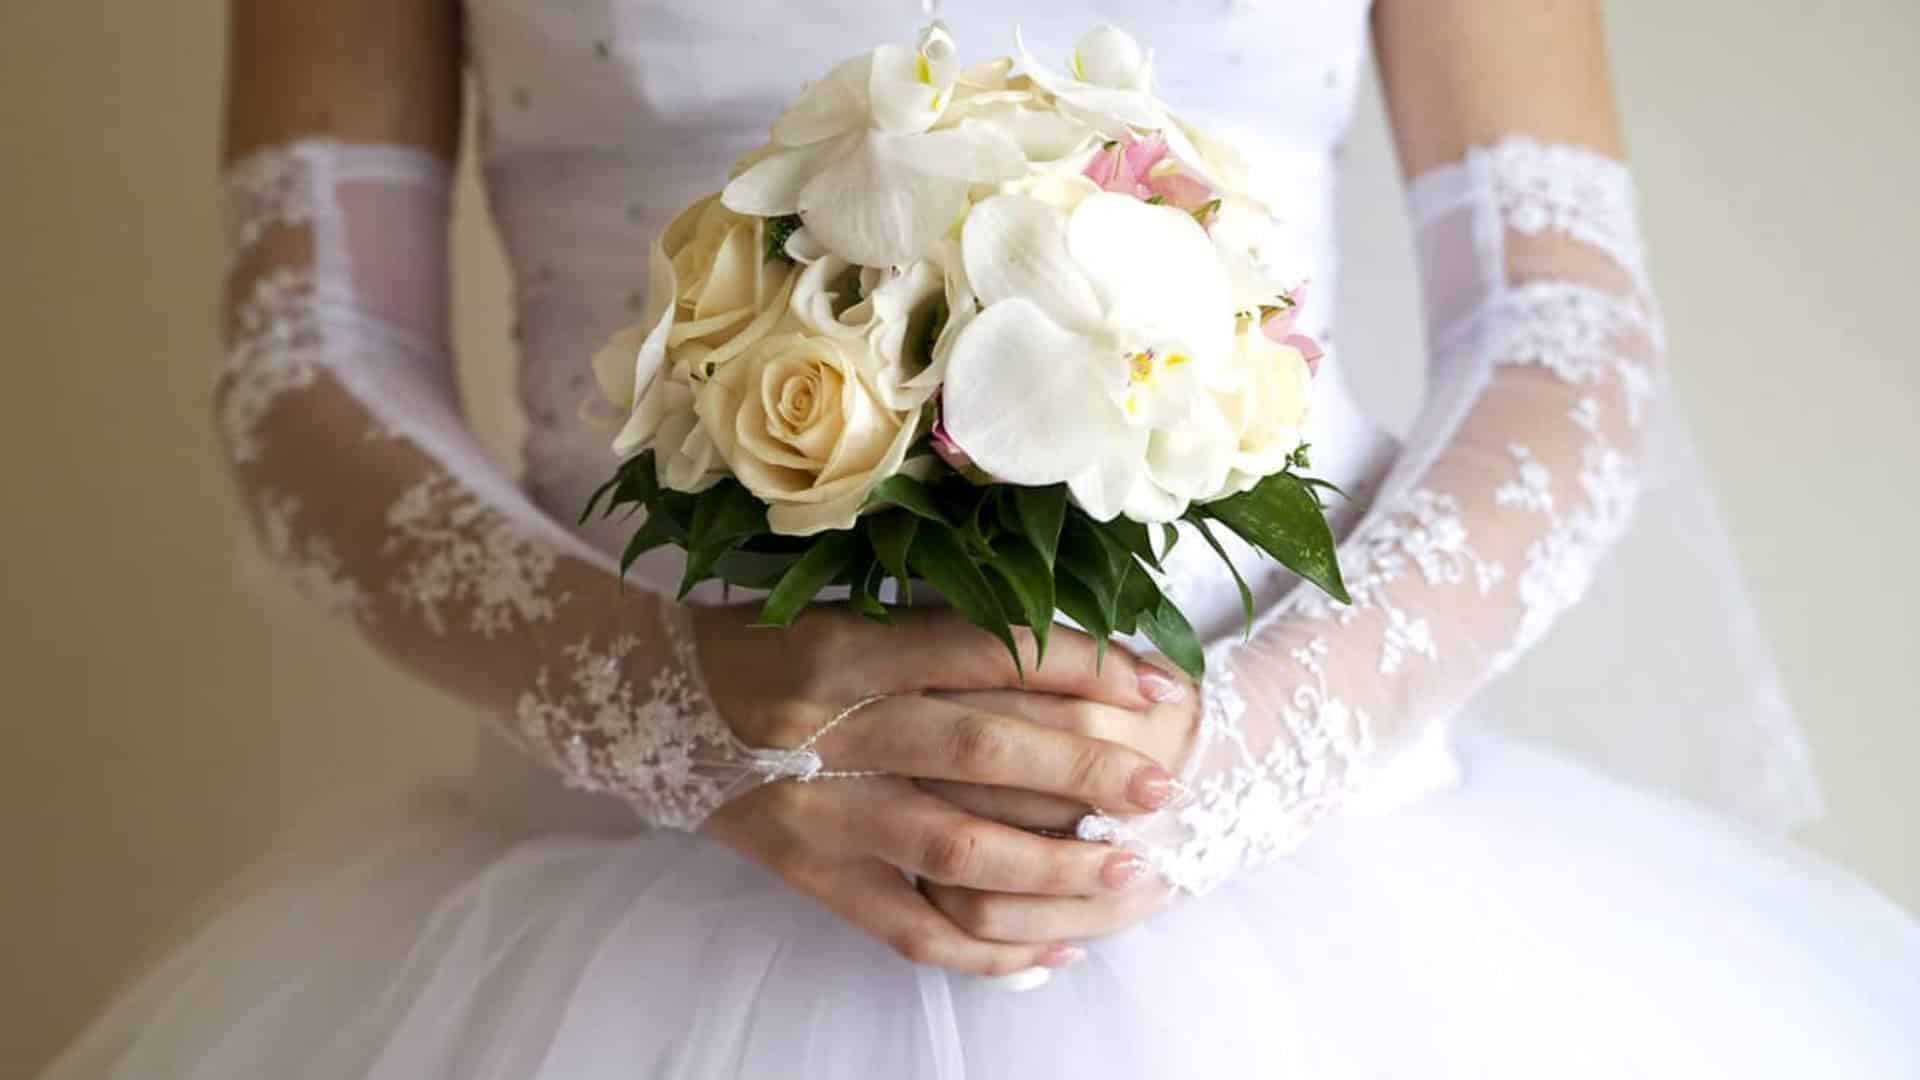 Woman in white dress holding a bouquet with white flowers